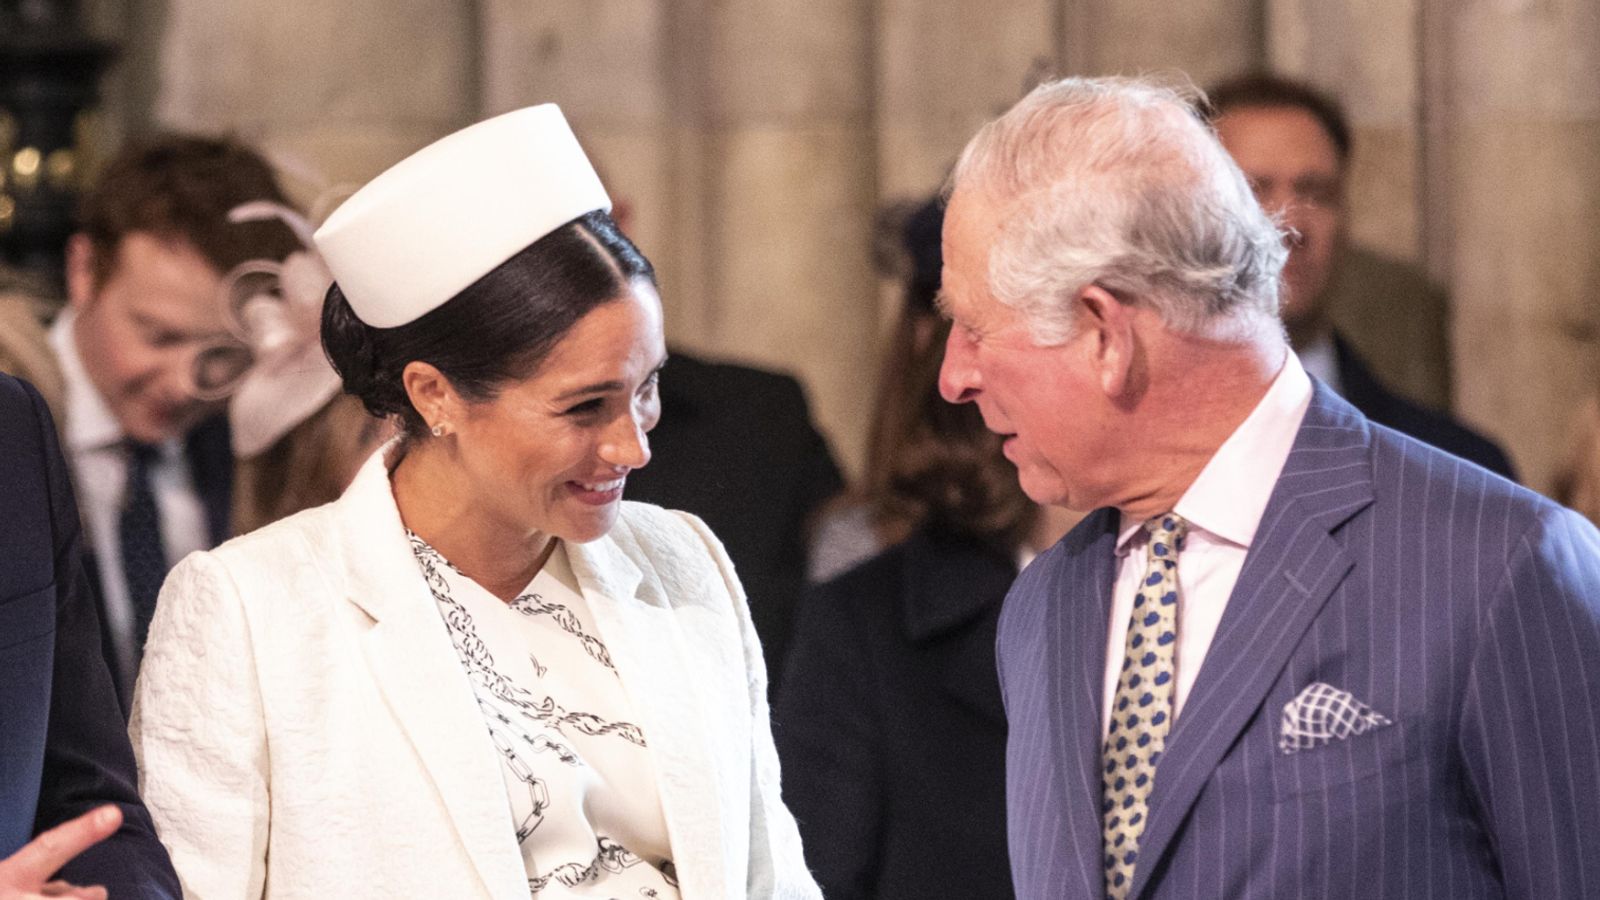 Meghan wrote to King Charles expressing concern about unconscious bias in the Royal Family - reports